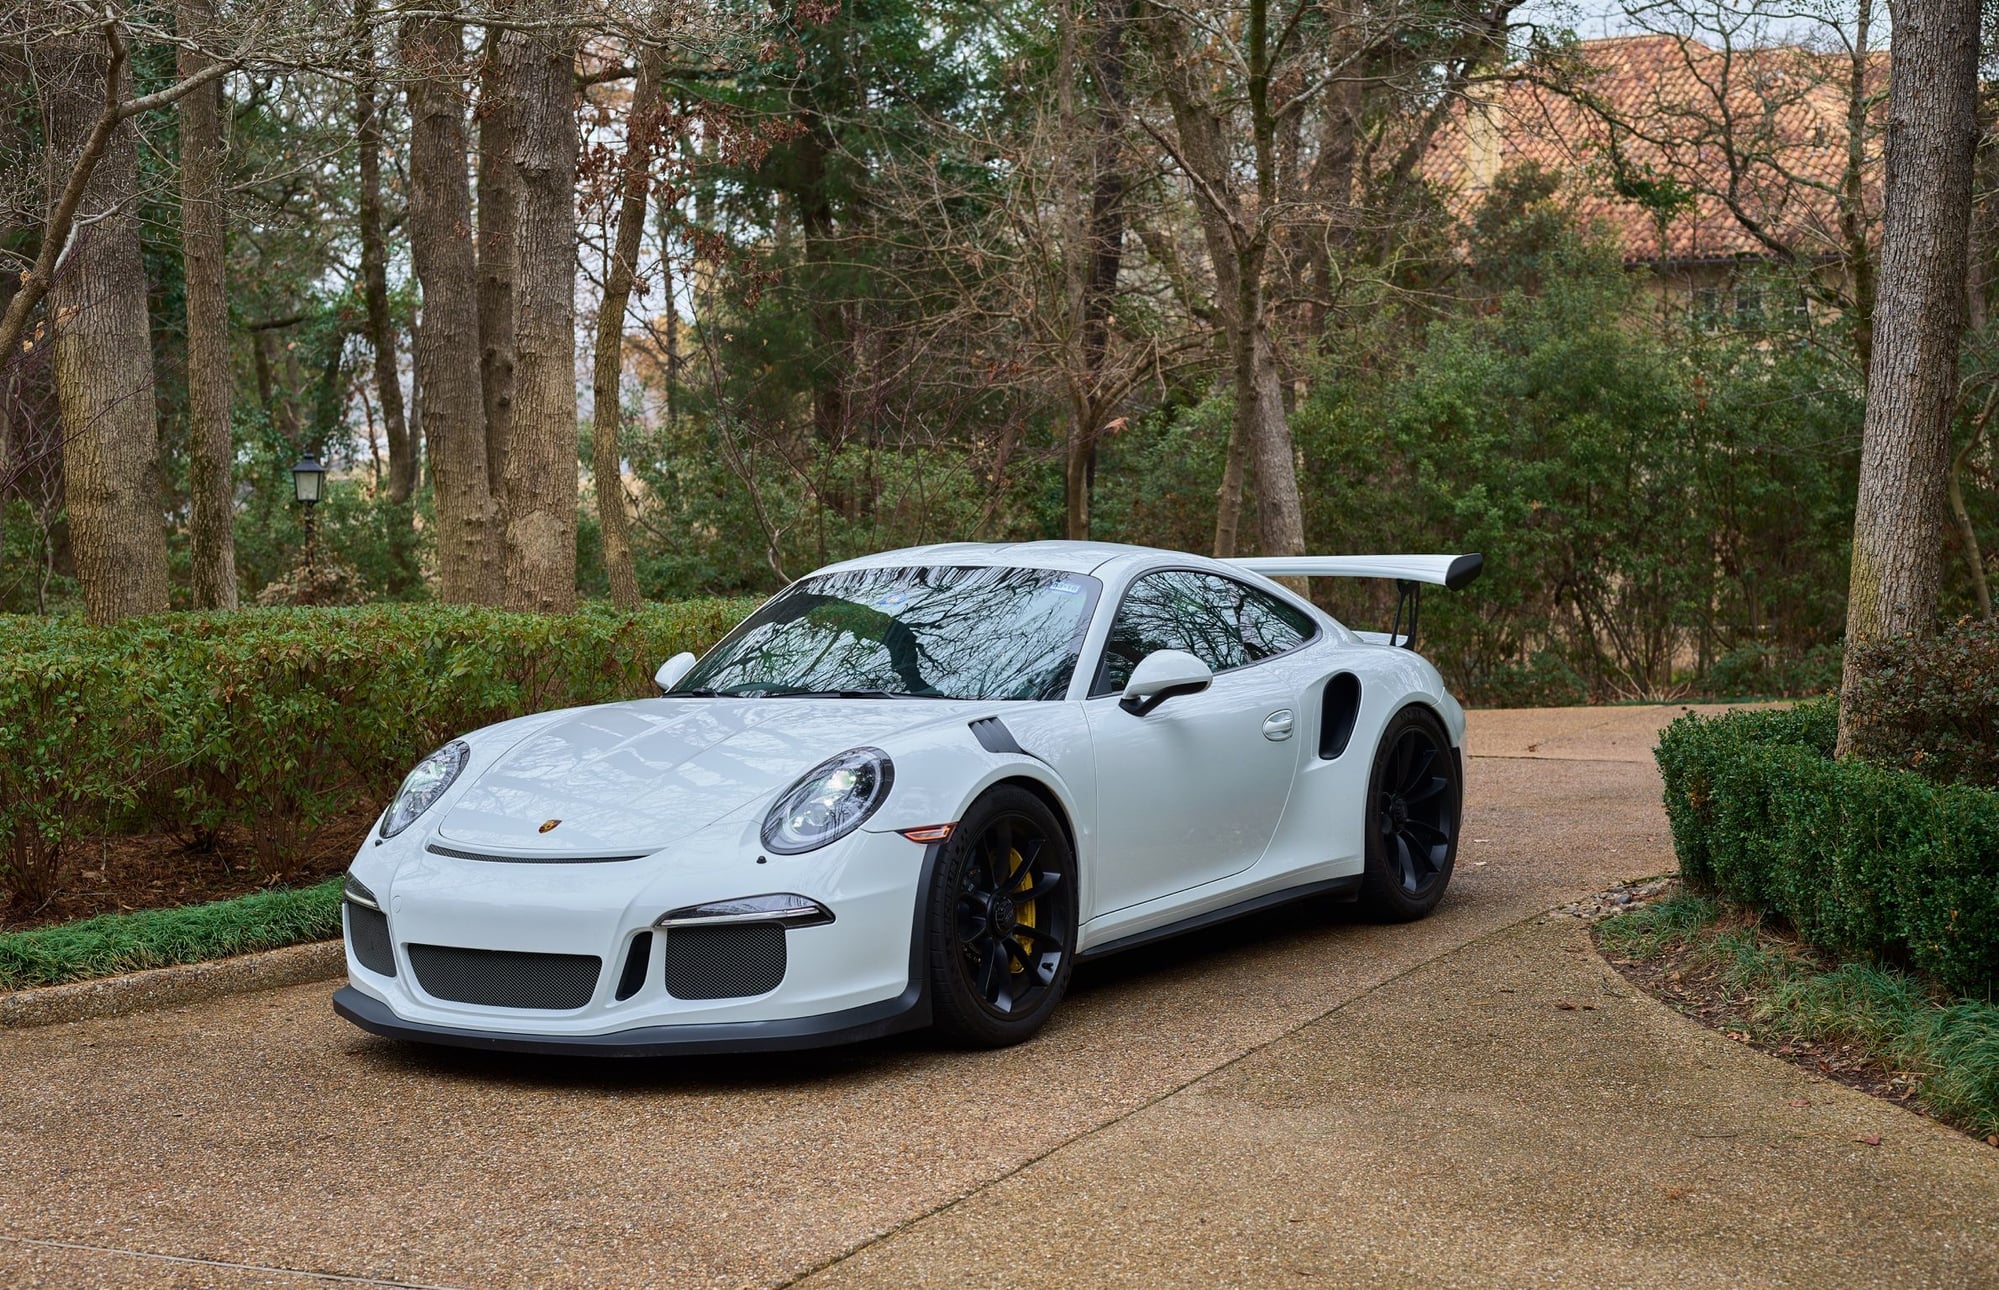 2016 Porsche GT3 - 2016 White GT3RS with full XPEL for $1500 over MSRP CPO till 08/21/2021 - Used - VIN WP0AF2A90GS187119 - 6,000 Miles - 6 cyl - 2WD - Automatic - Coupe - White - Tyler, TX 75709, United States